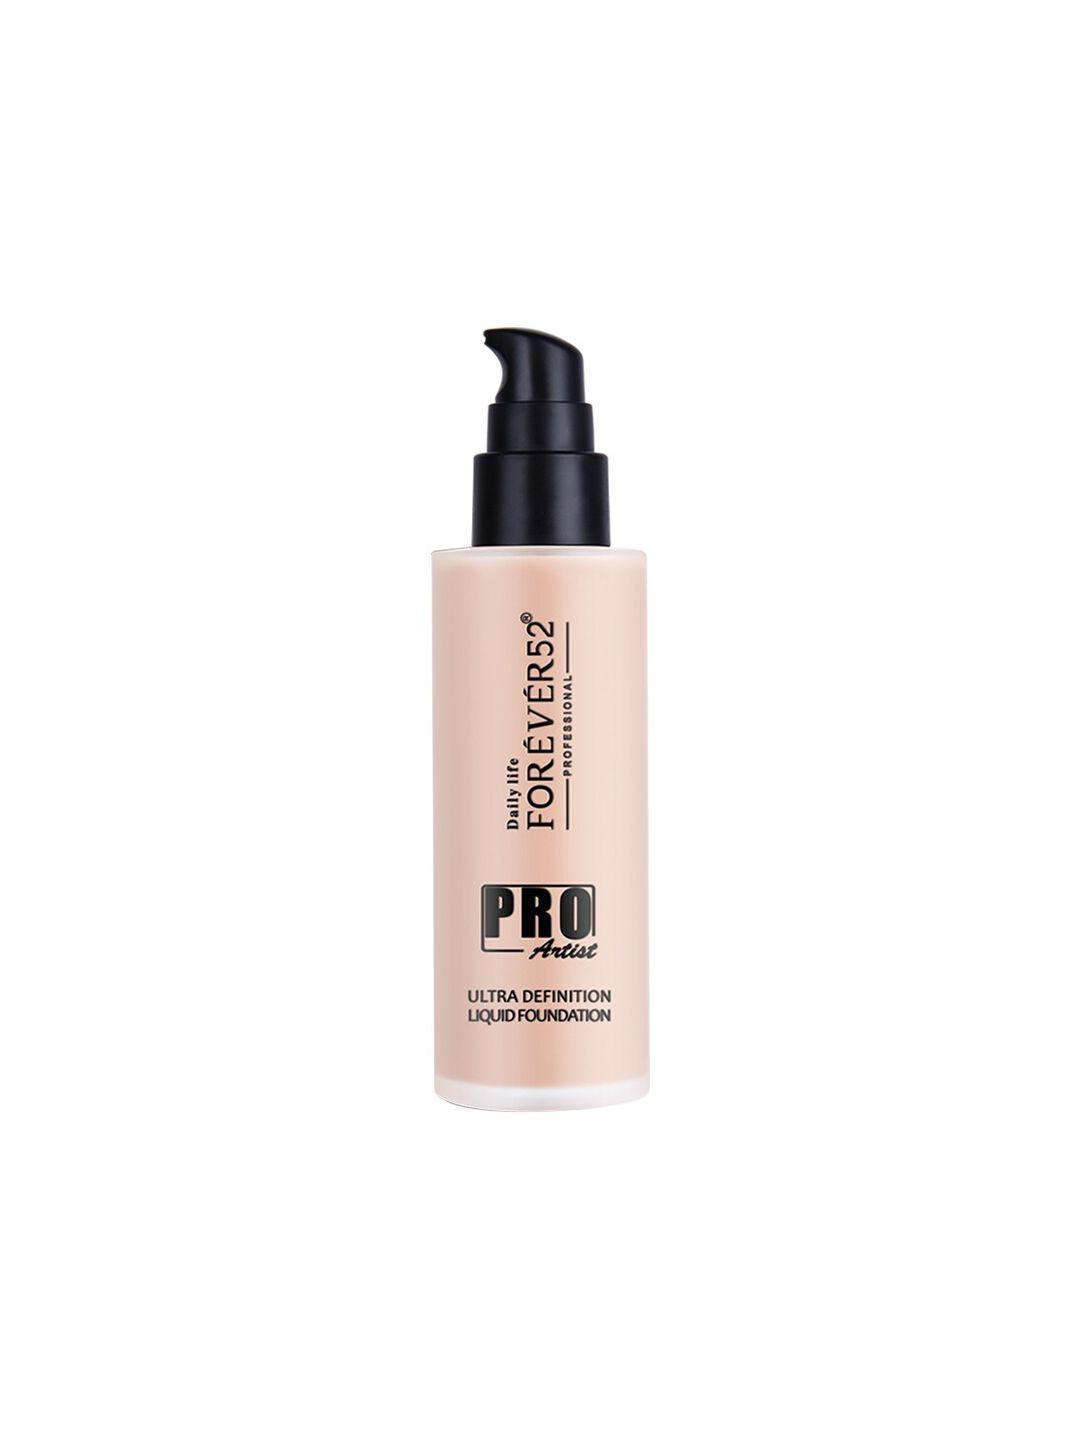 daily-life-forever52-women-pro-artist-ultra-definition-liquid-foundation